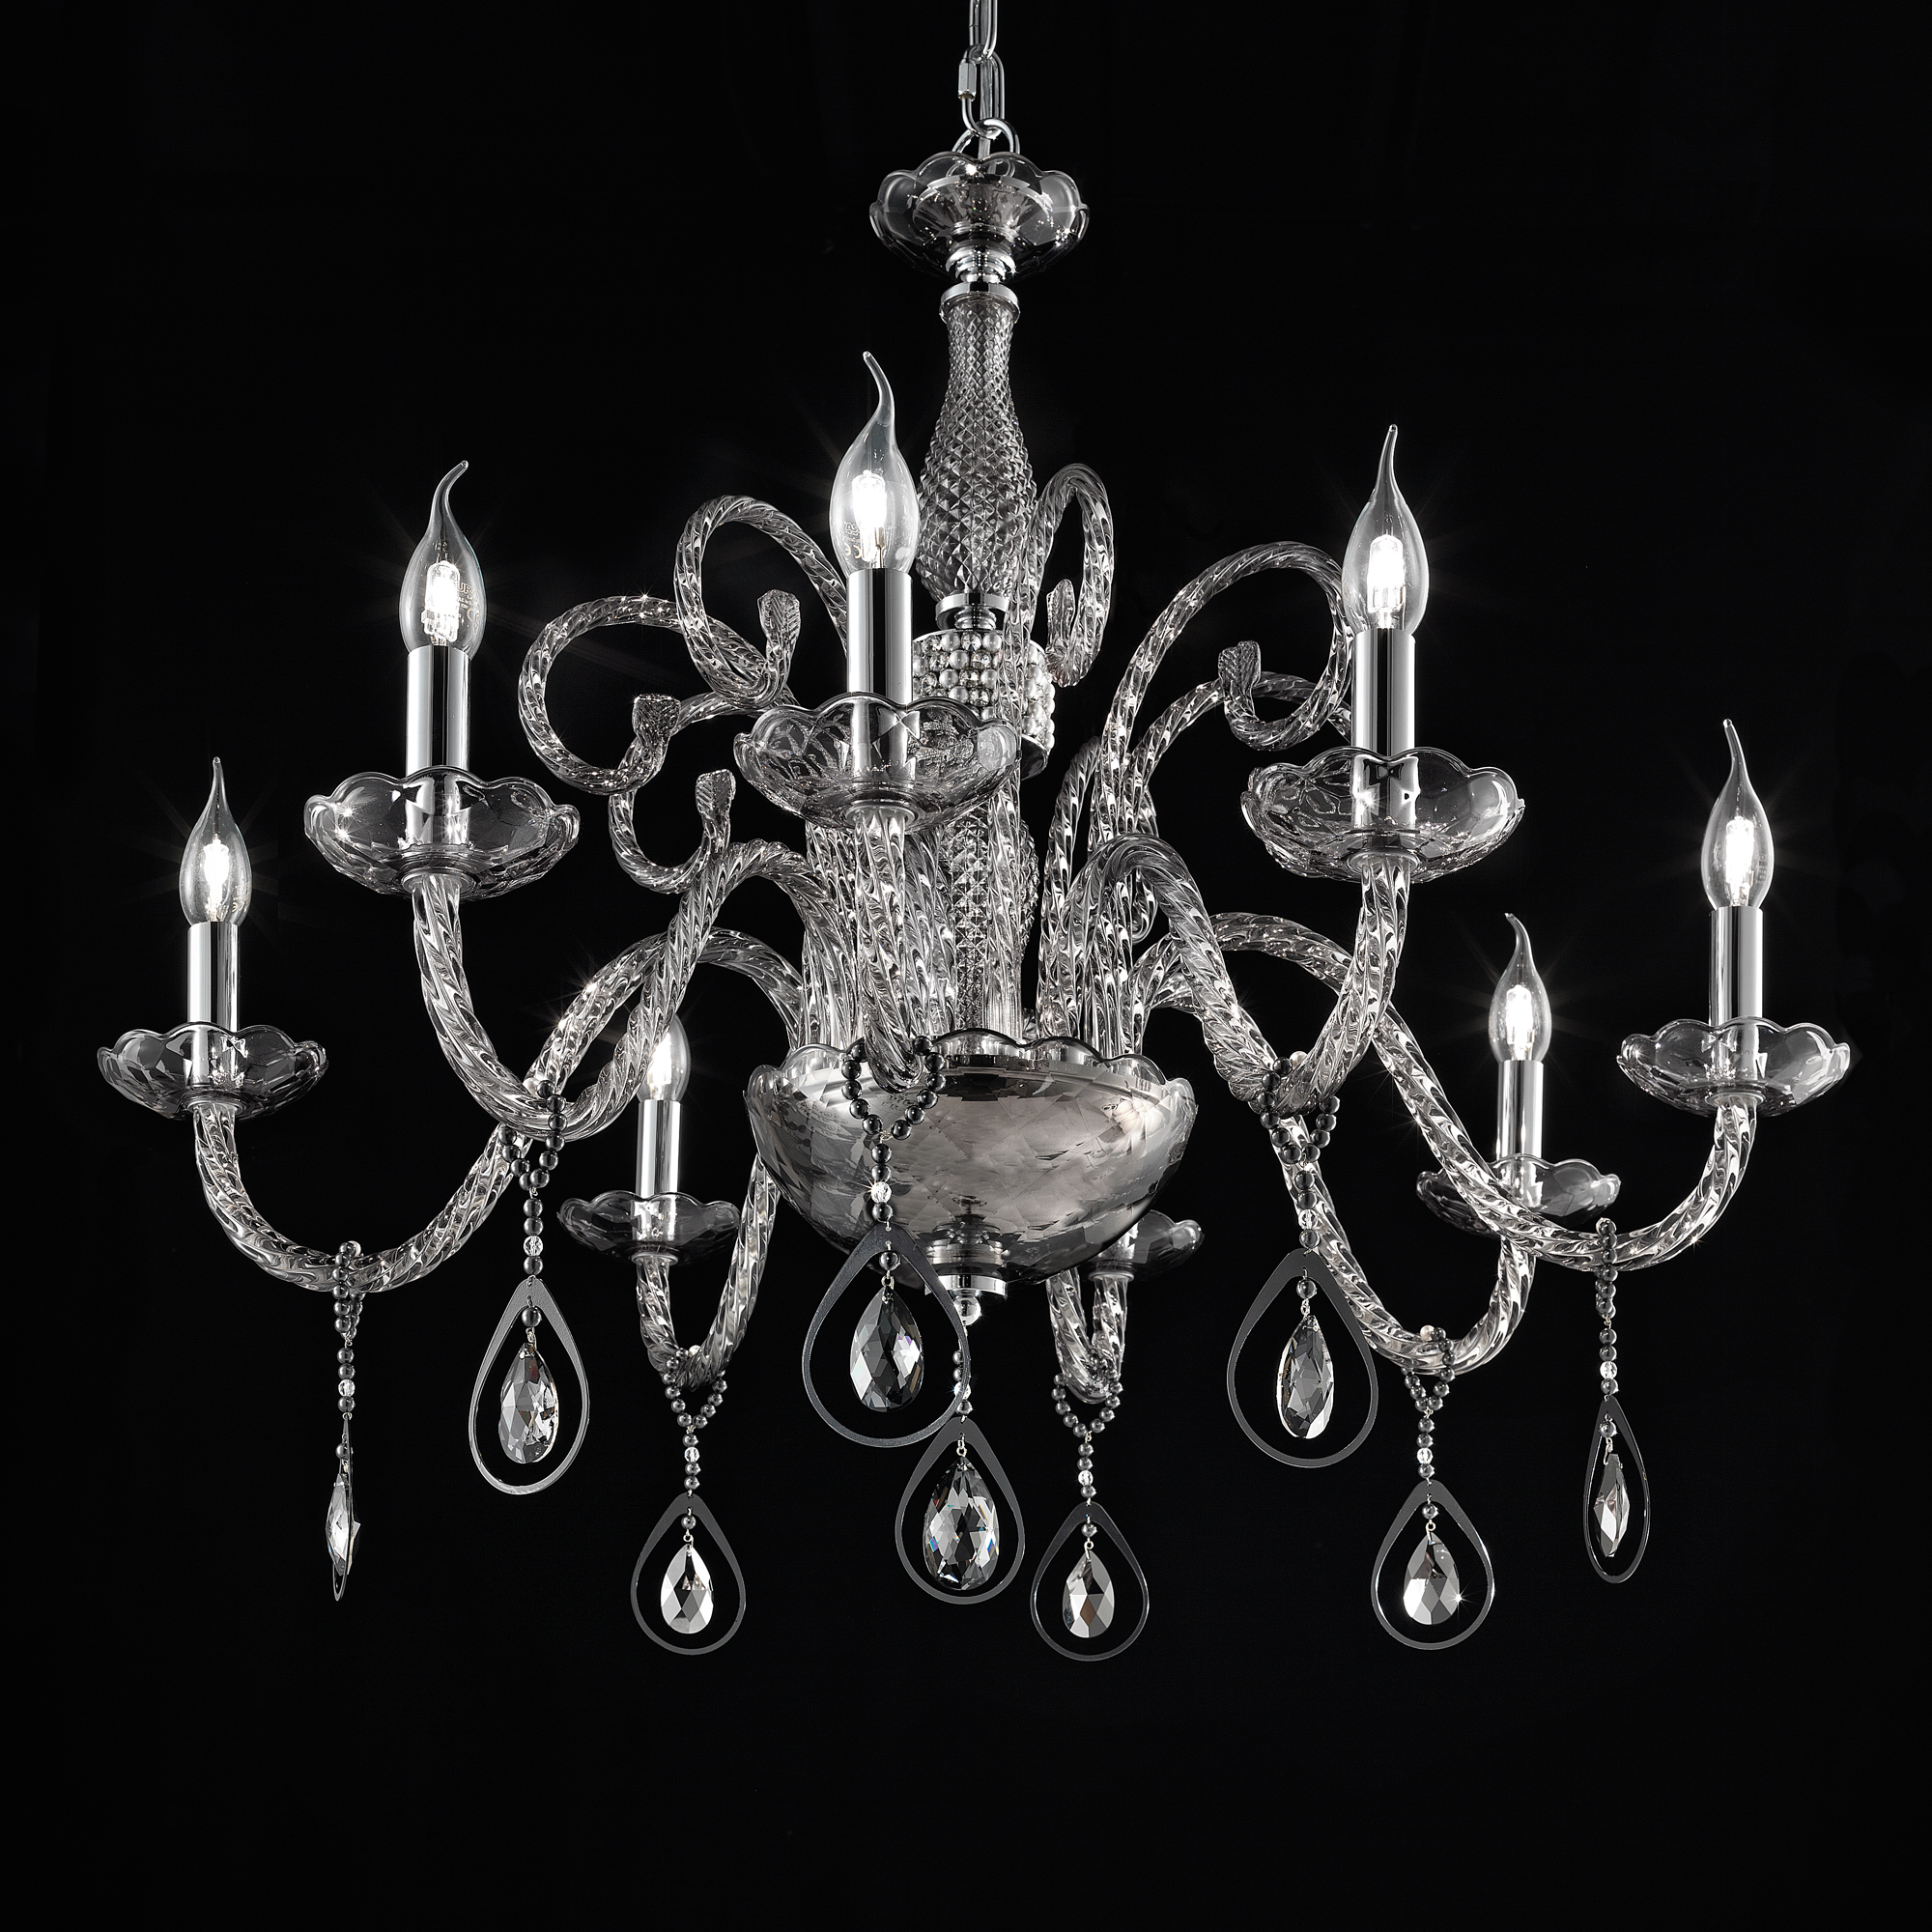 Smoked Glass Chandelier With Pendant Drops